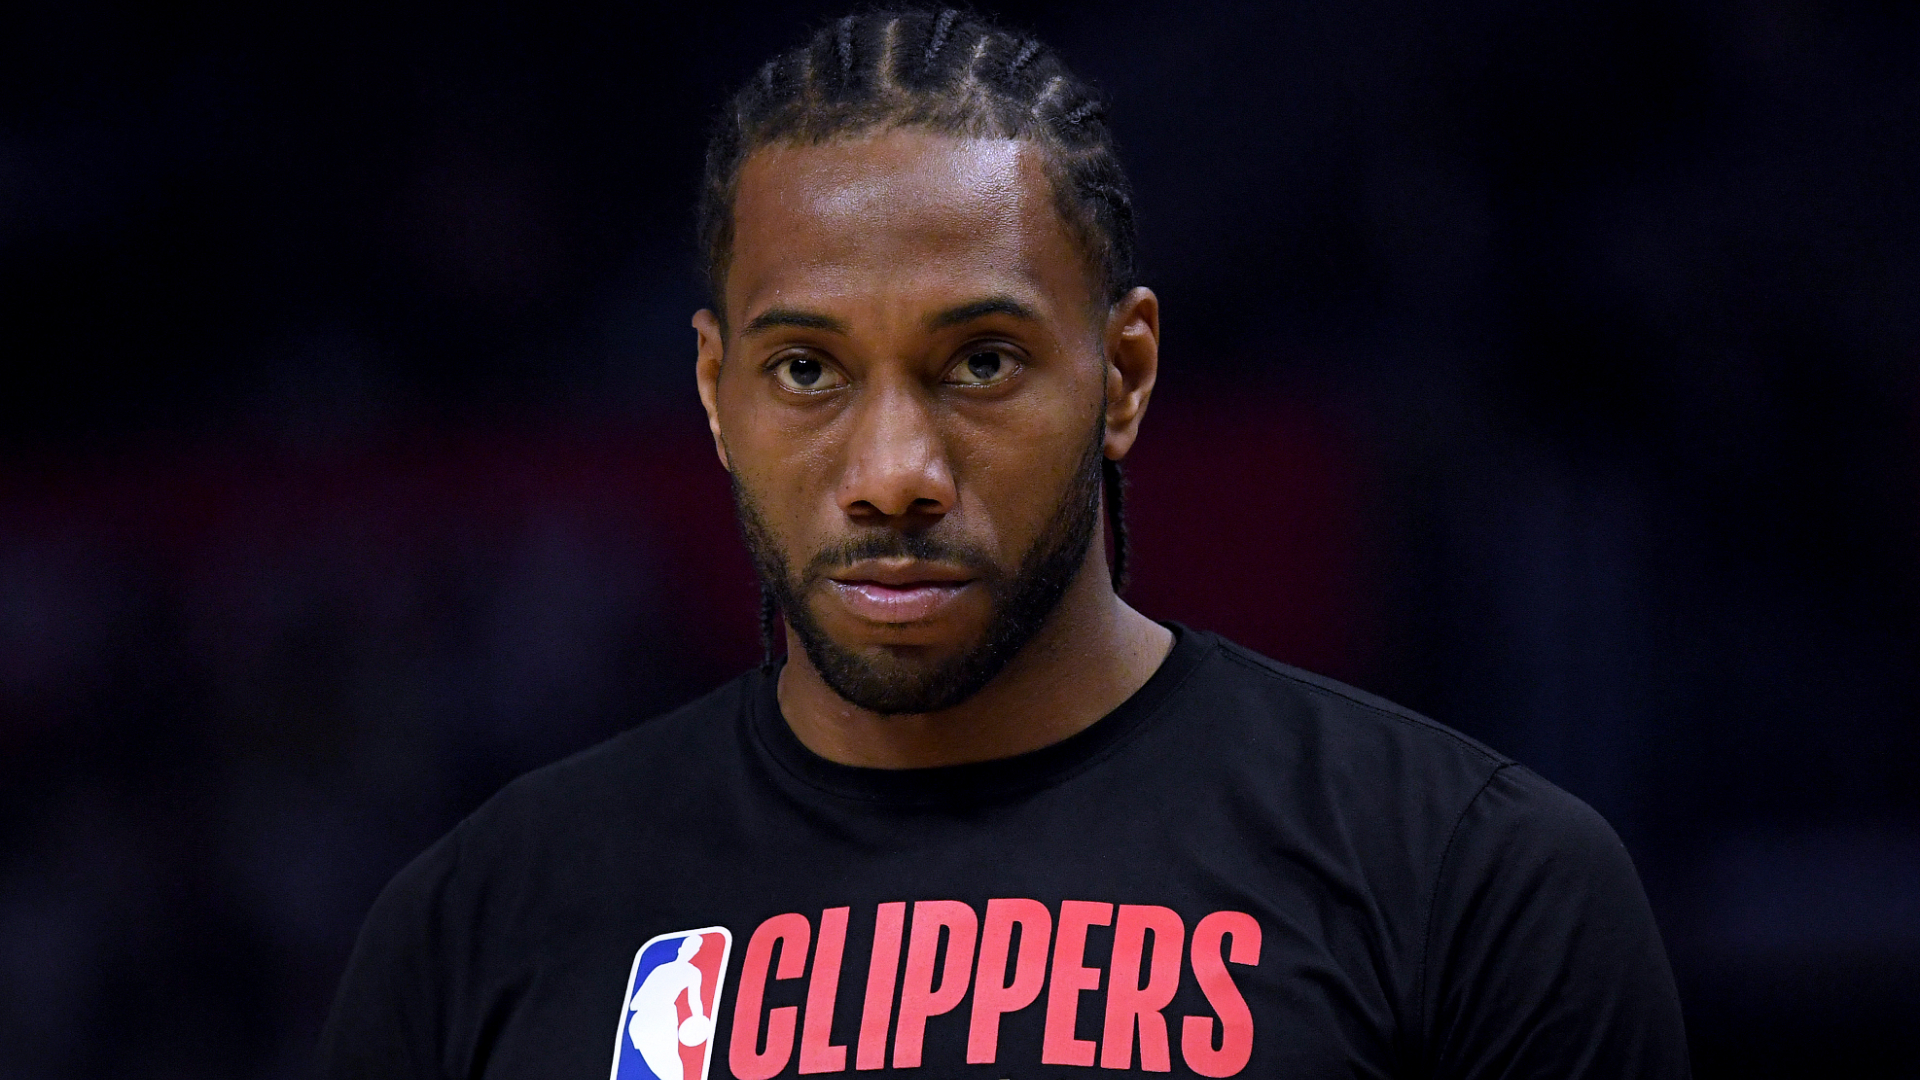 Kawhi Leonard did not travel to Orlando with his team-mates but is now at the resort and undergoing the coronavirus protocols.